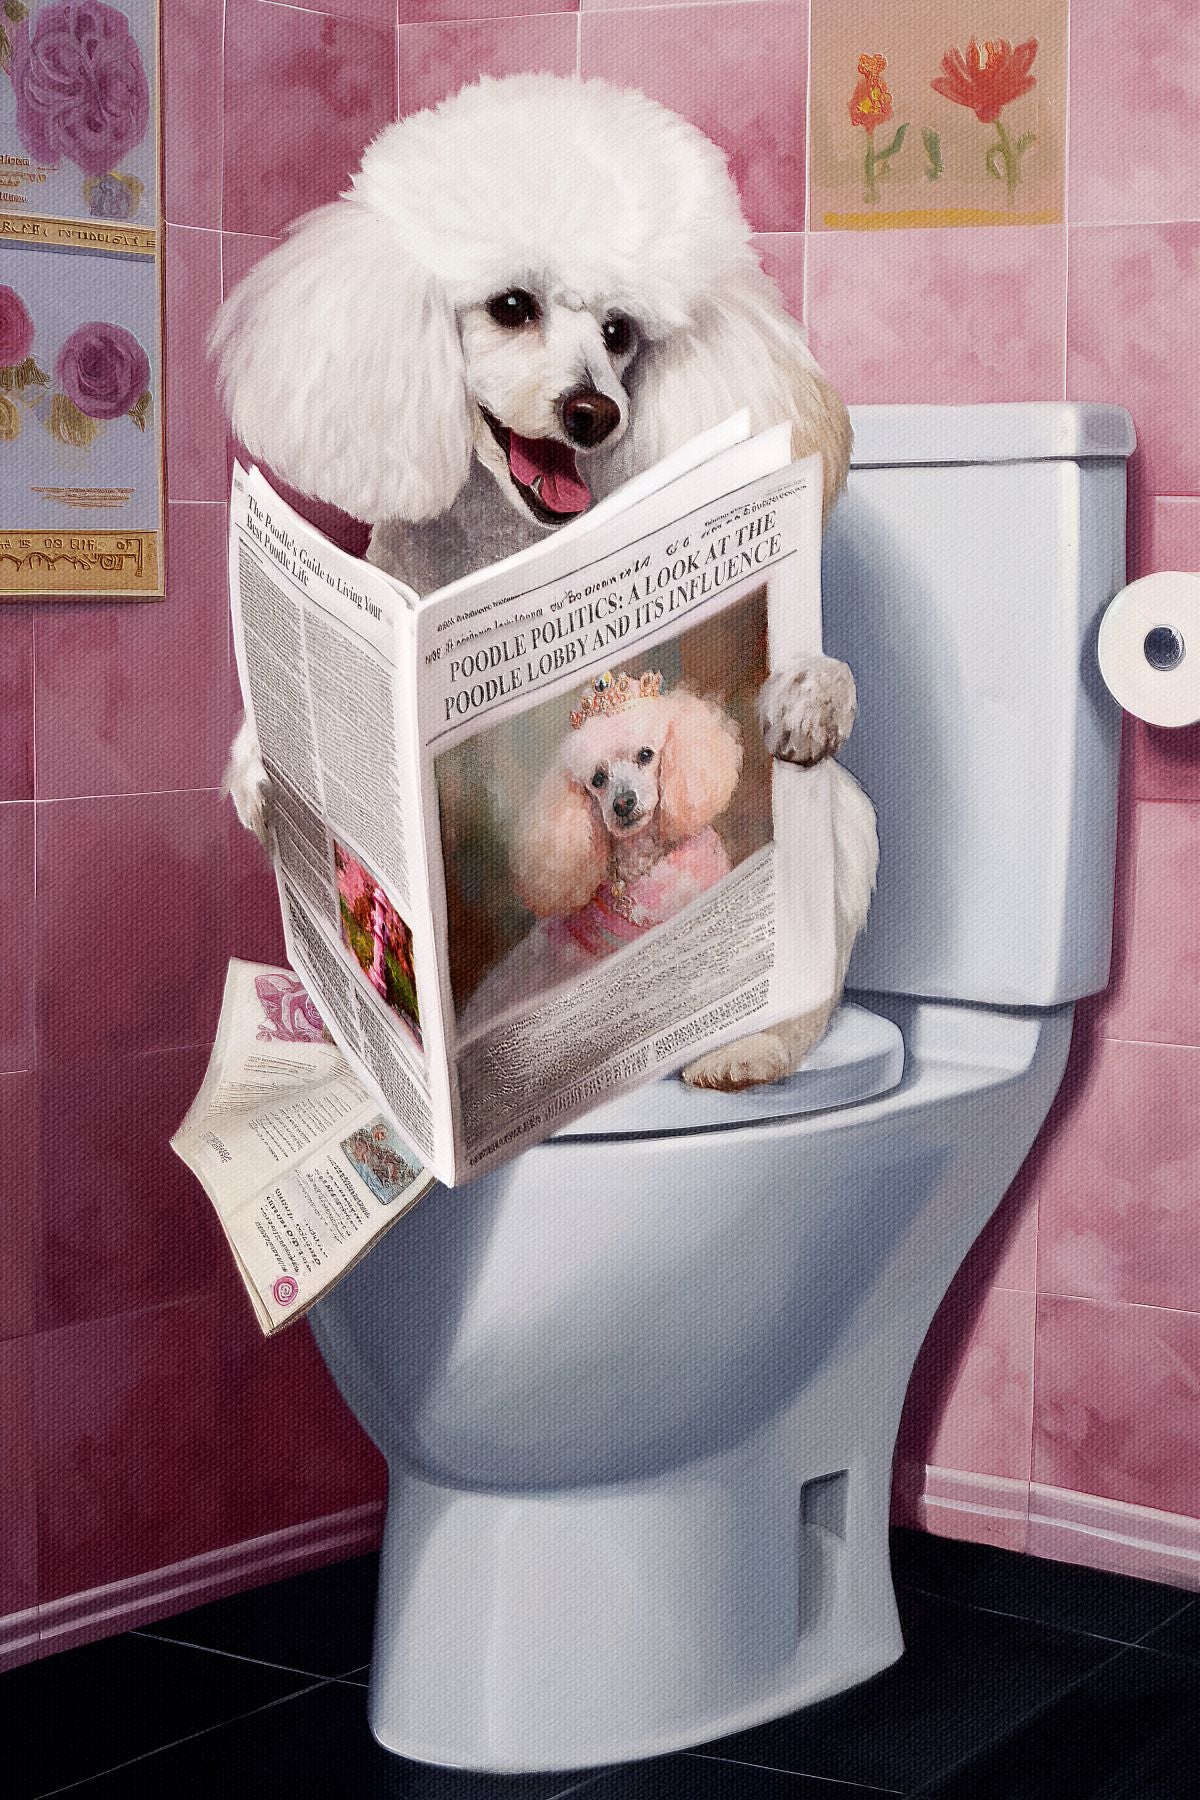 Poodle On A Toilet